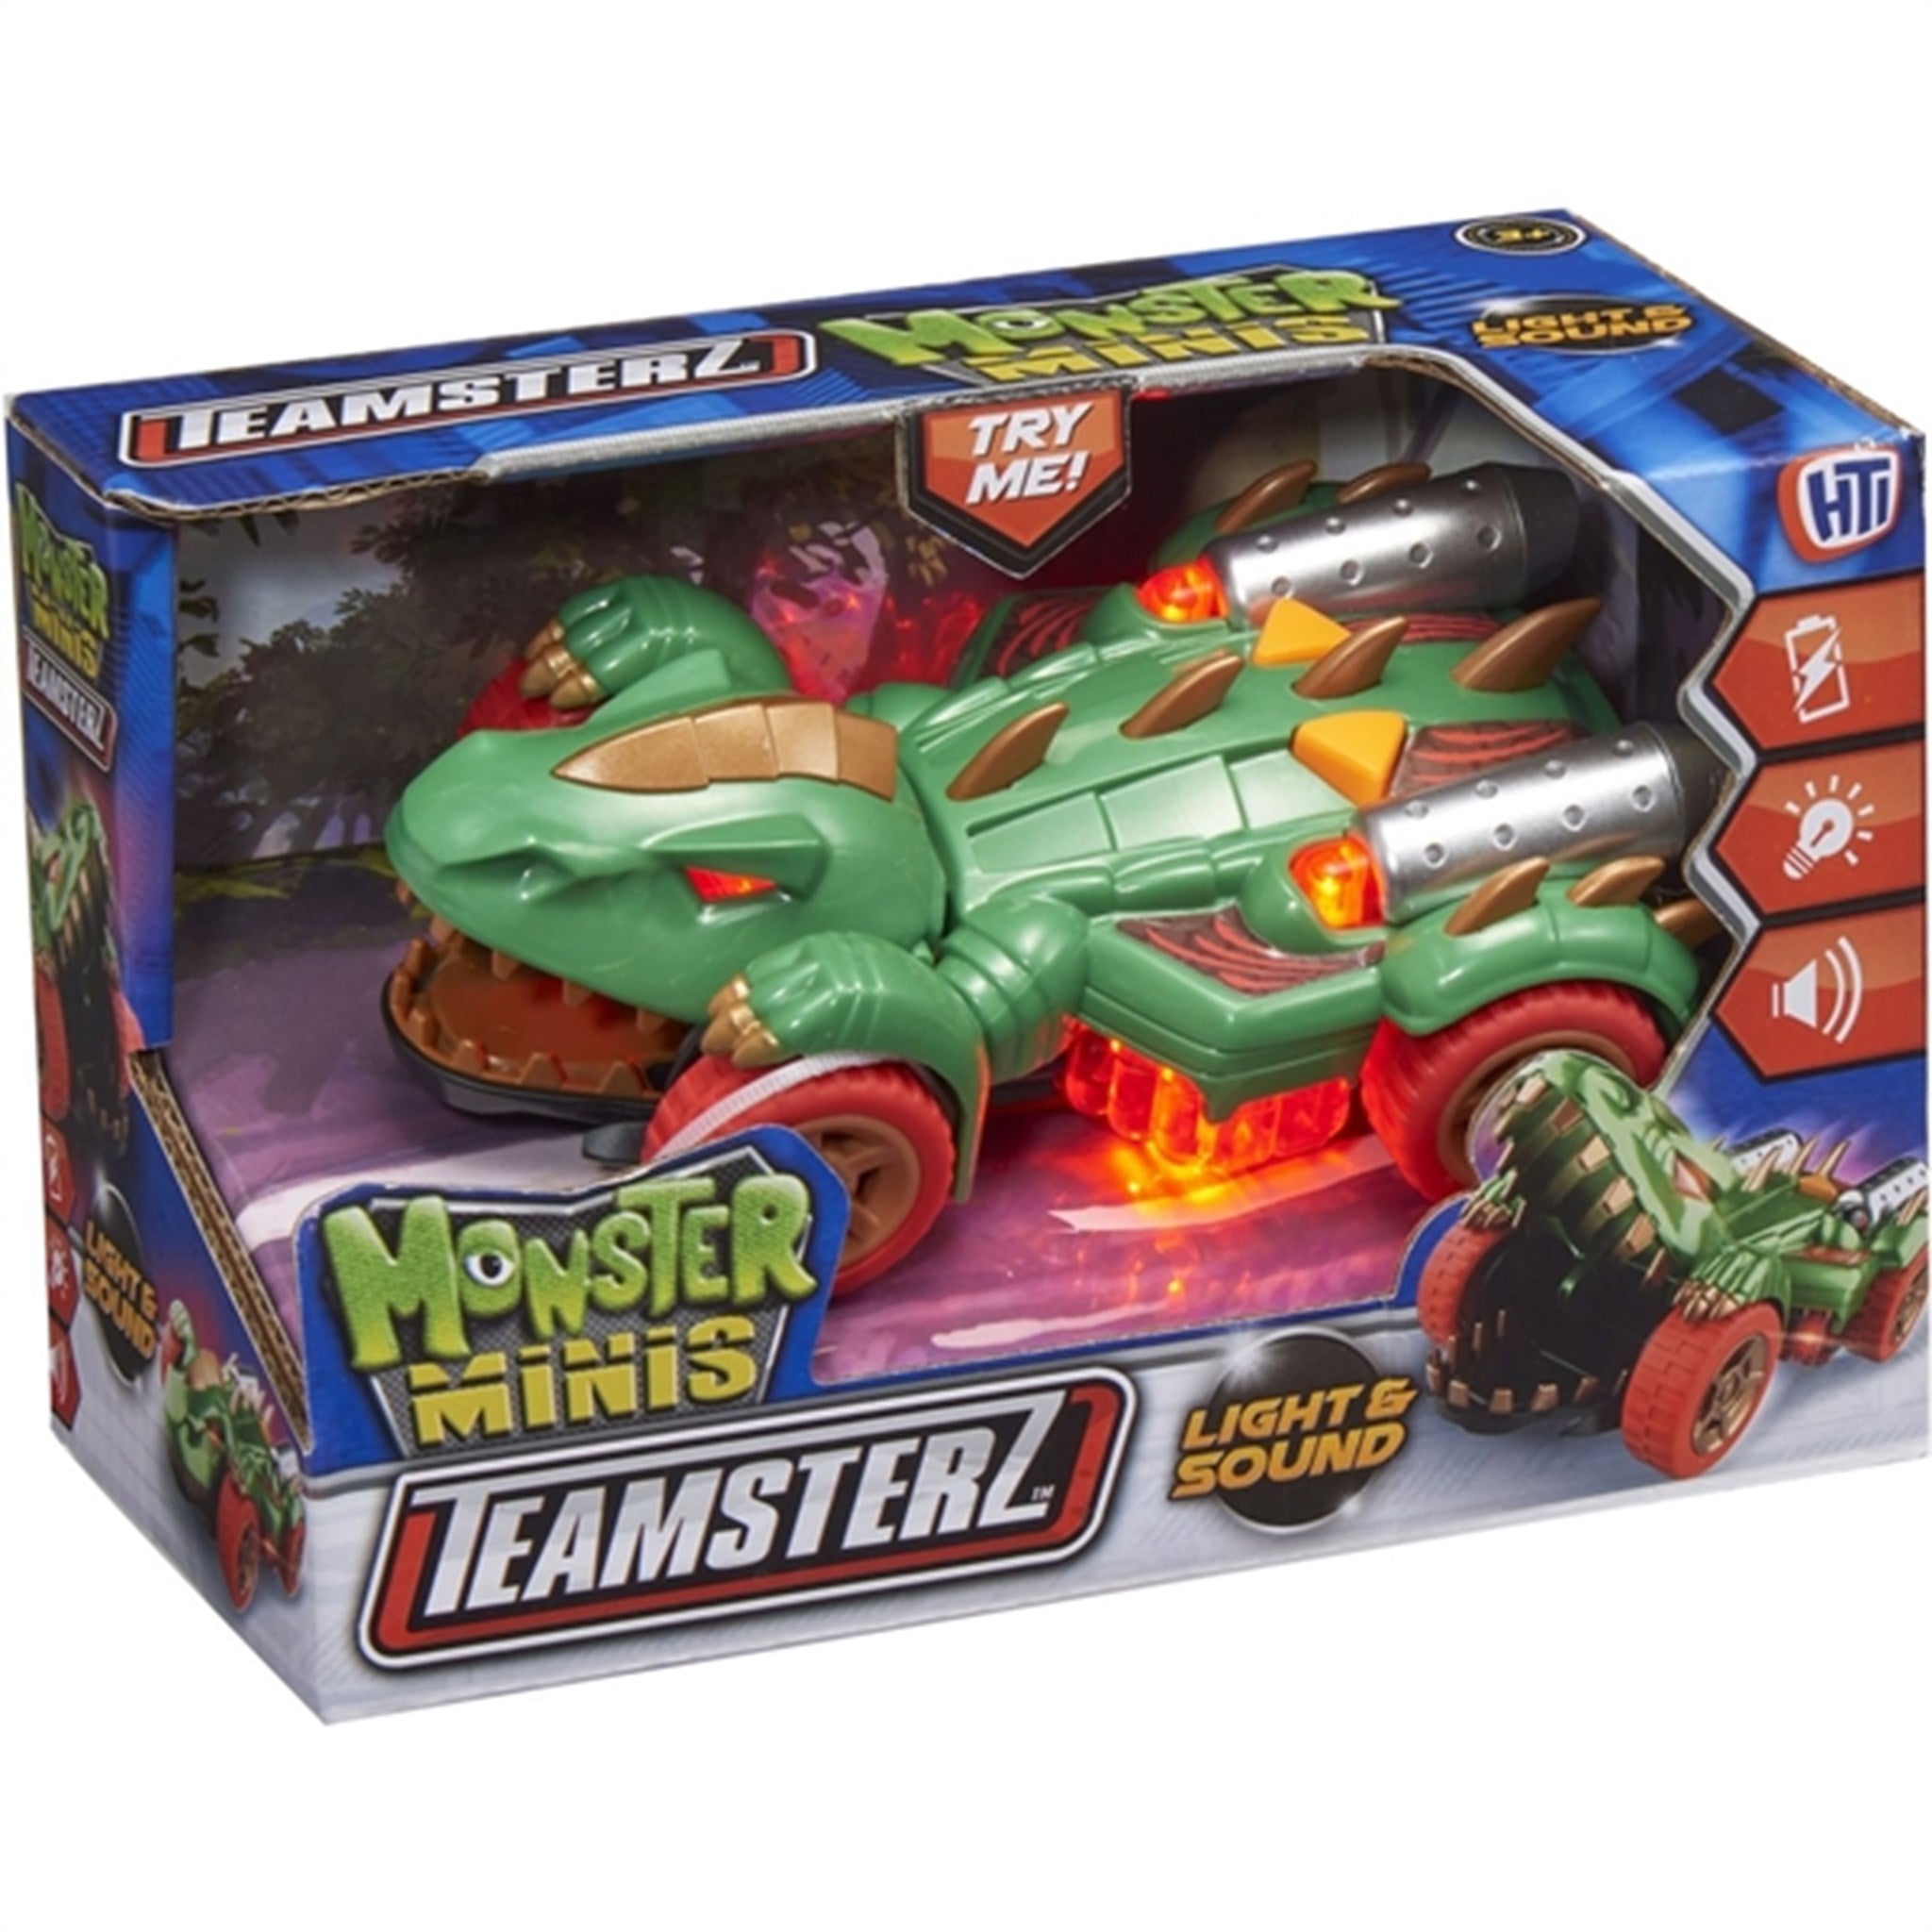 Teamsterz Monster Minis L&S Dino 5